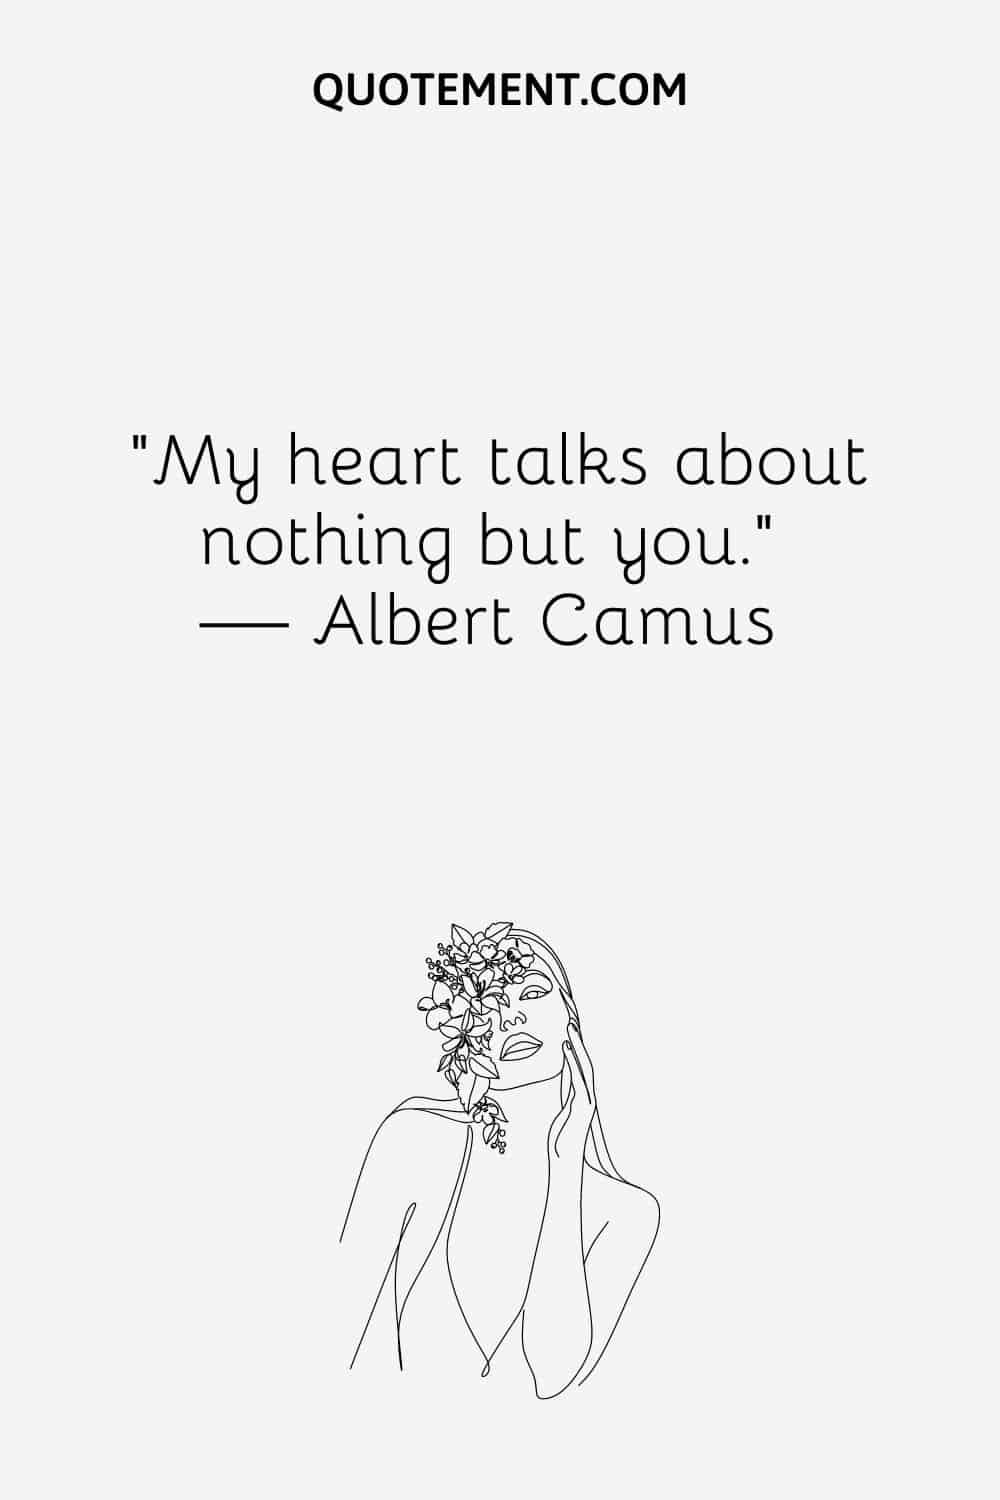 “My heart talks about nothing but you.” — Albert Camus